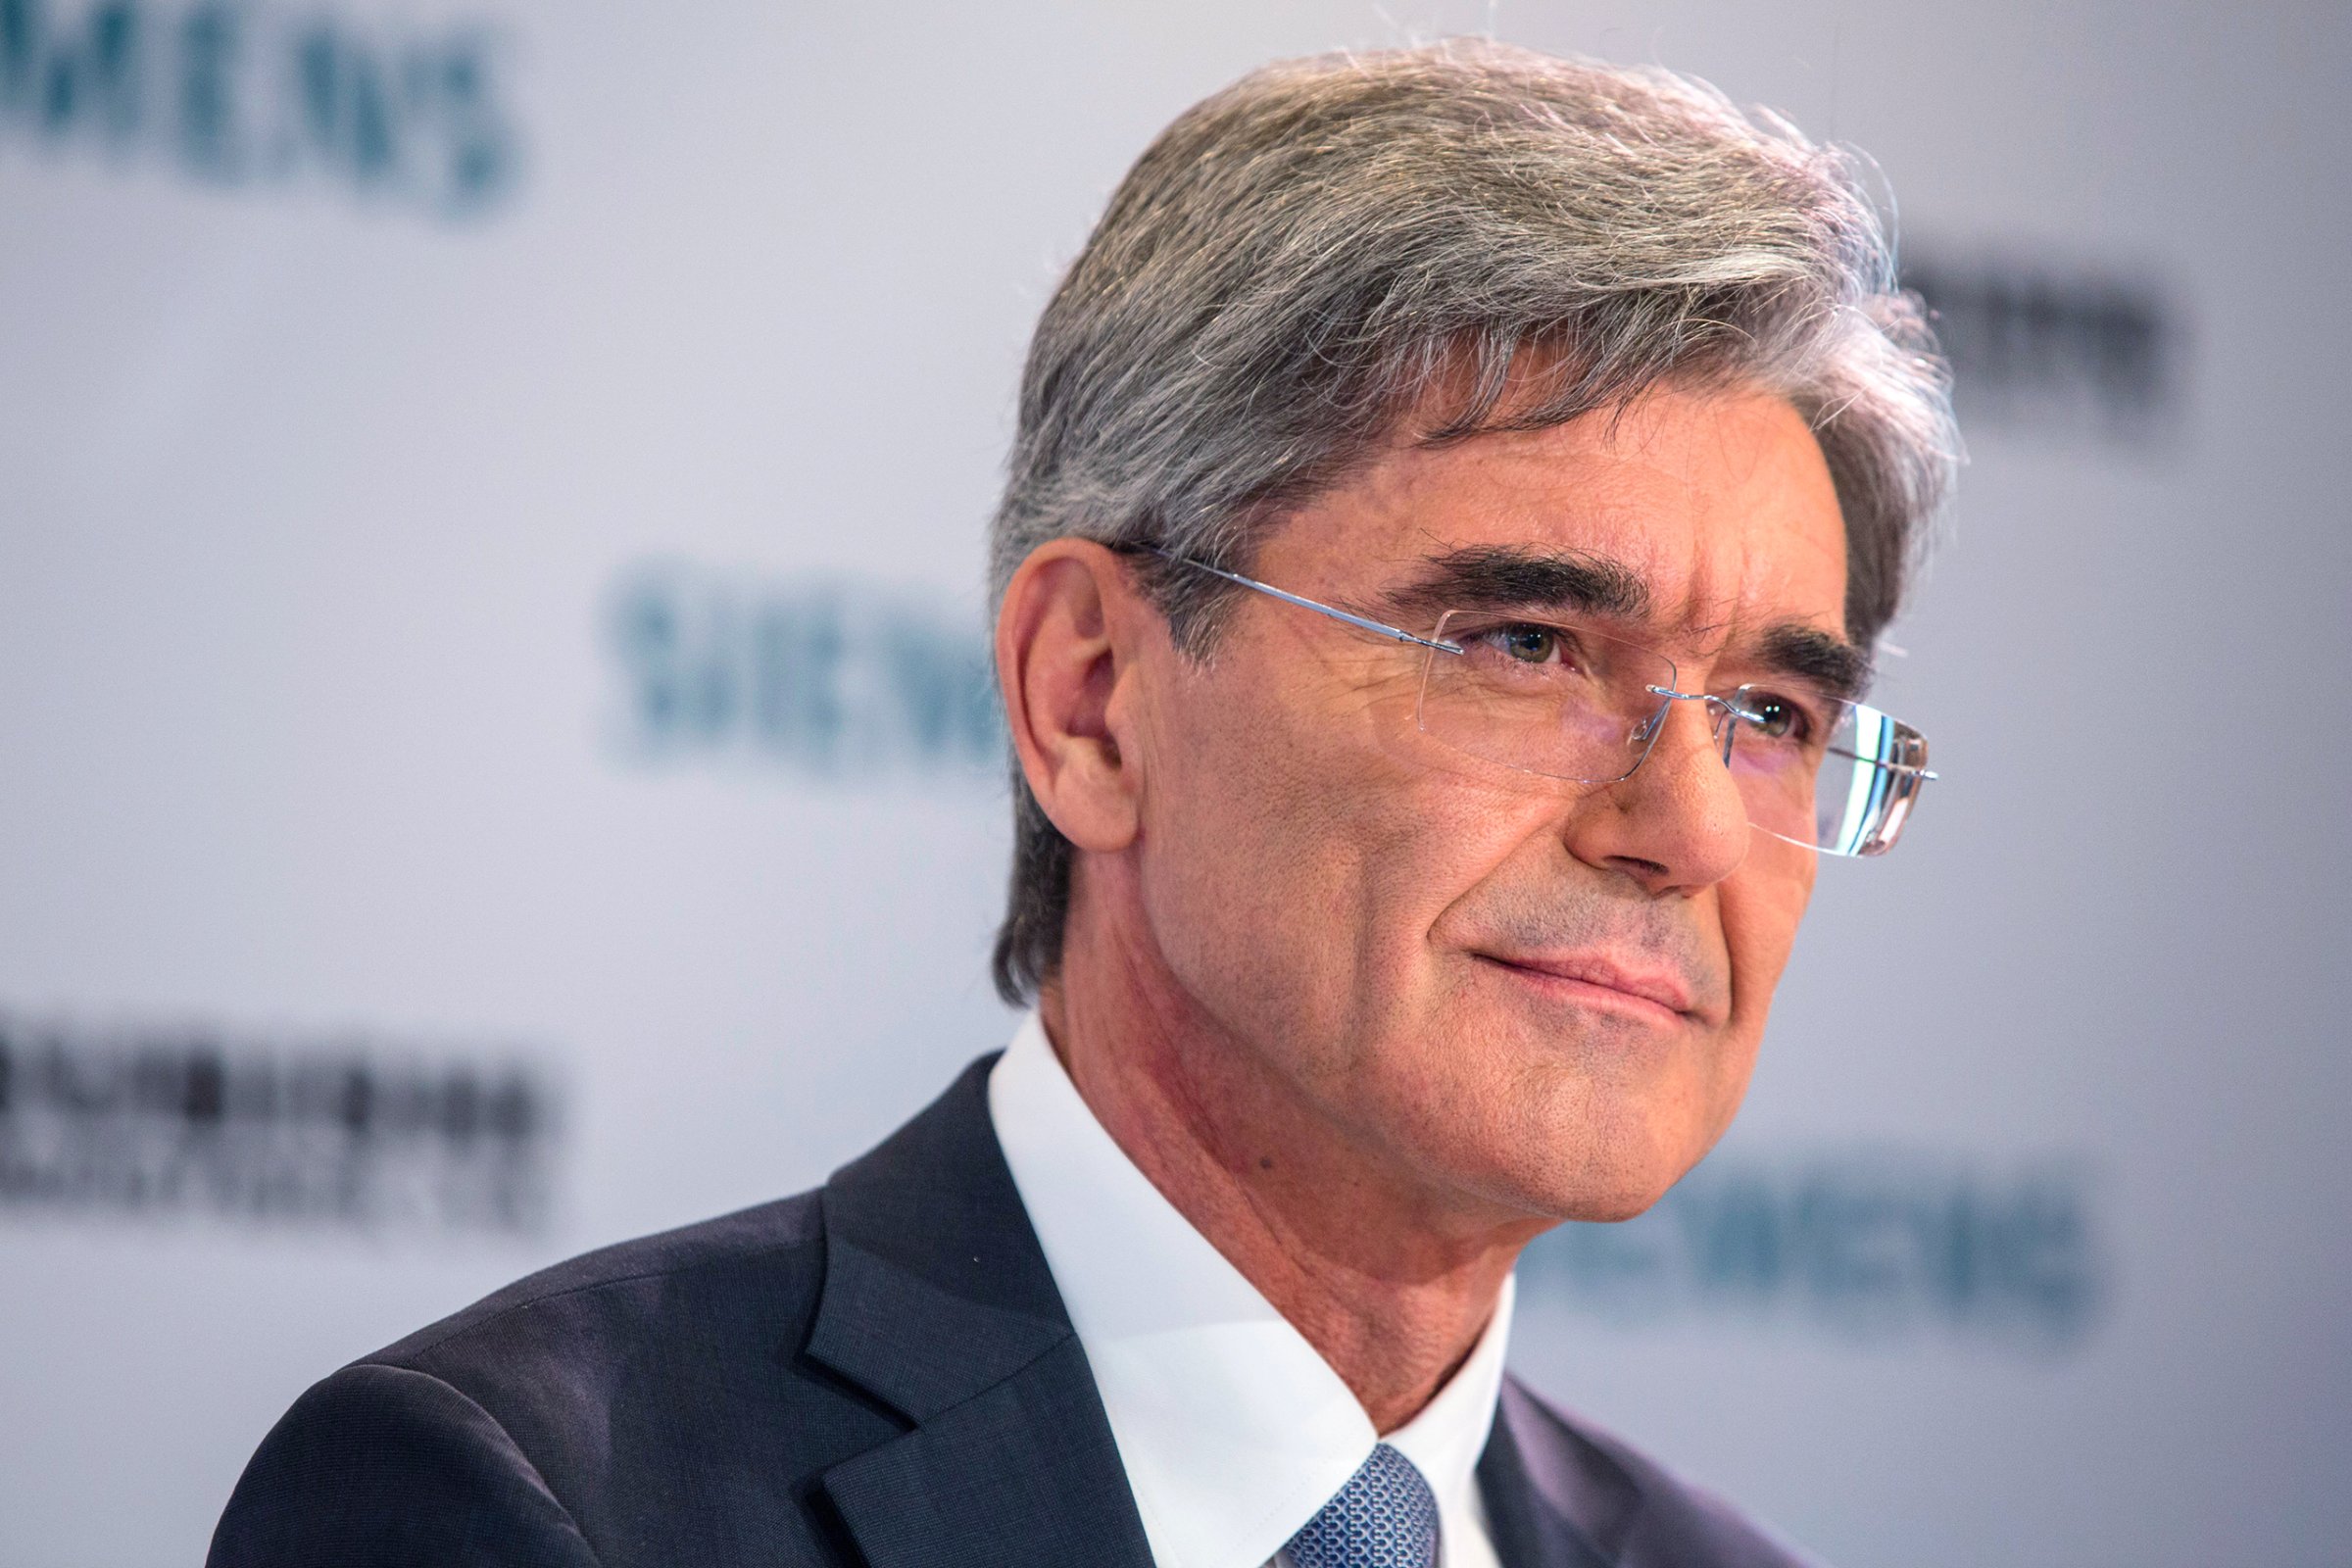 Joe Kaeser, chief executive officer of Siemens AG, pauses during a news conference to announce a joint bid with Mitsubishi Heavy Industries Ltd. for Alstom SA, in Paris on June 17, 2014.